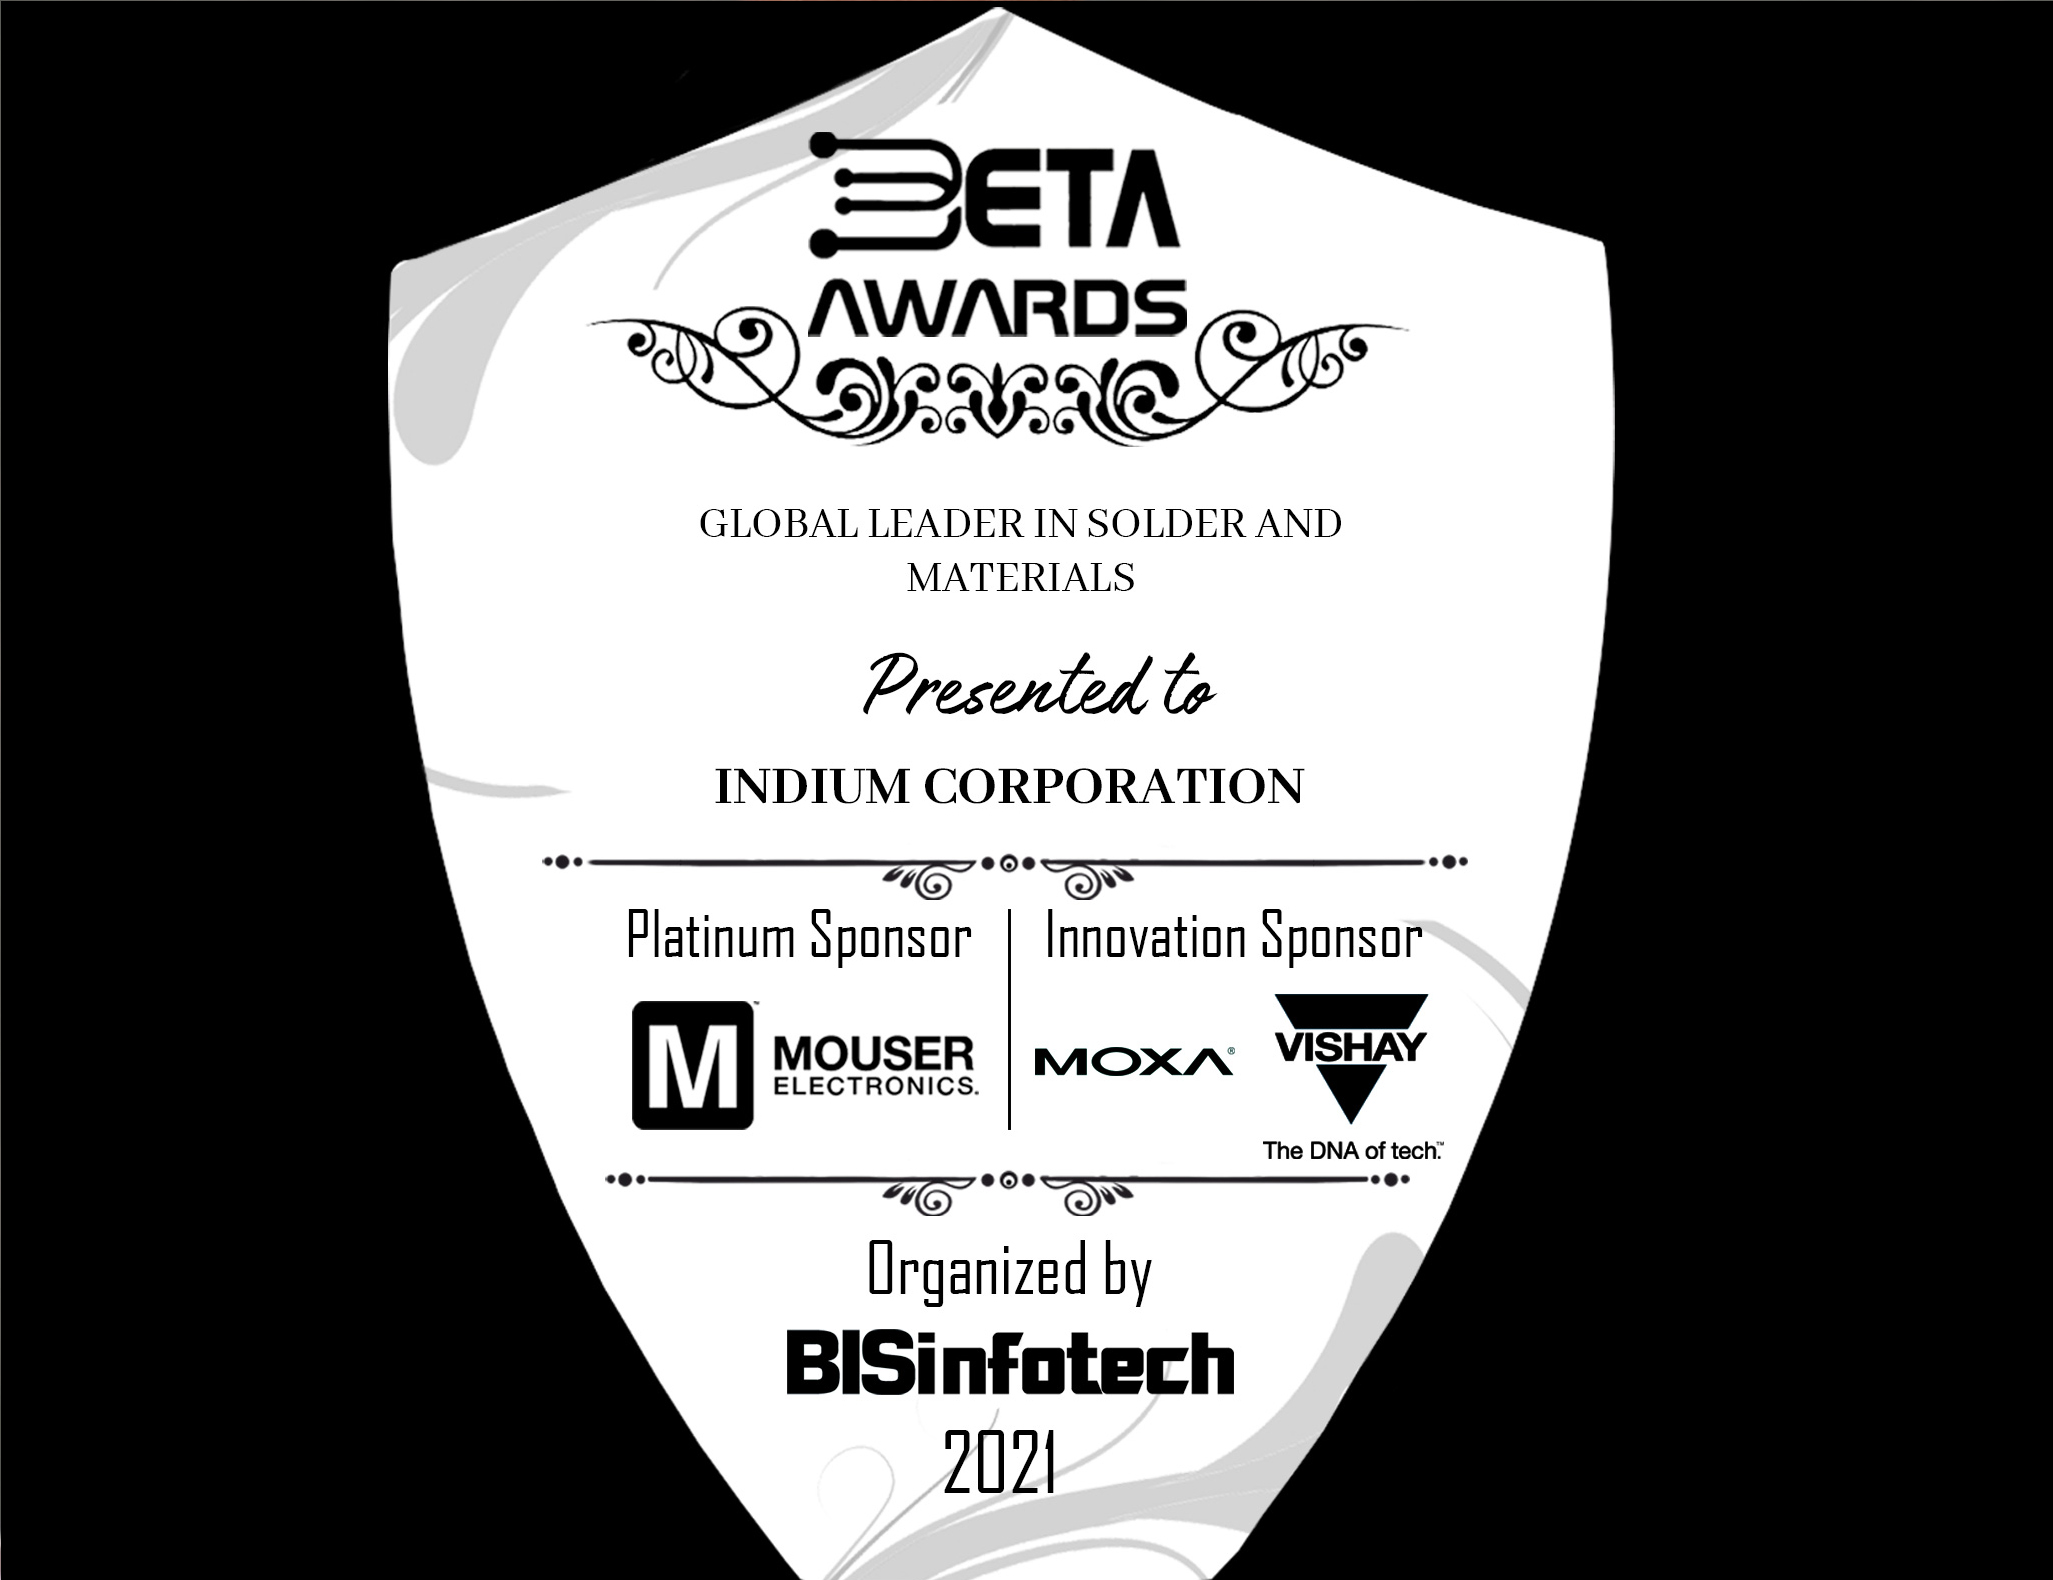 Indium Corporation Honored as Global Leader in ‘Solder and Materials’ with BETA Award news photo